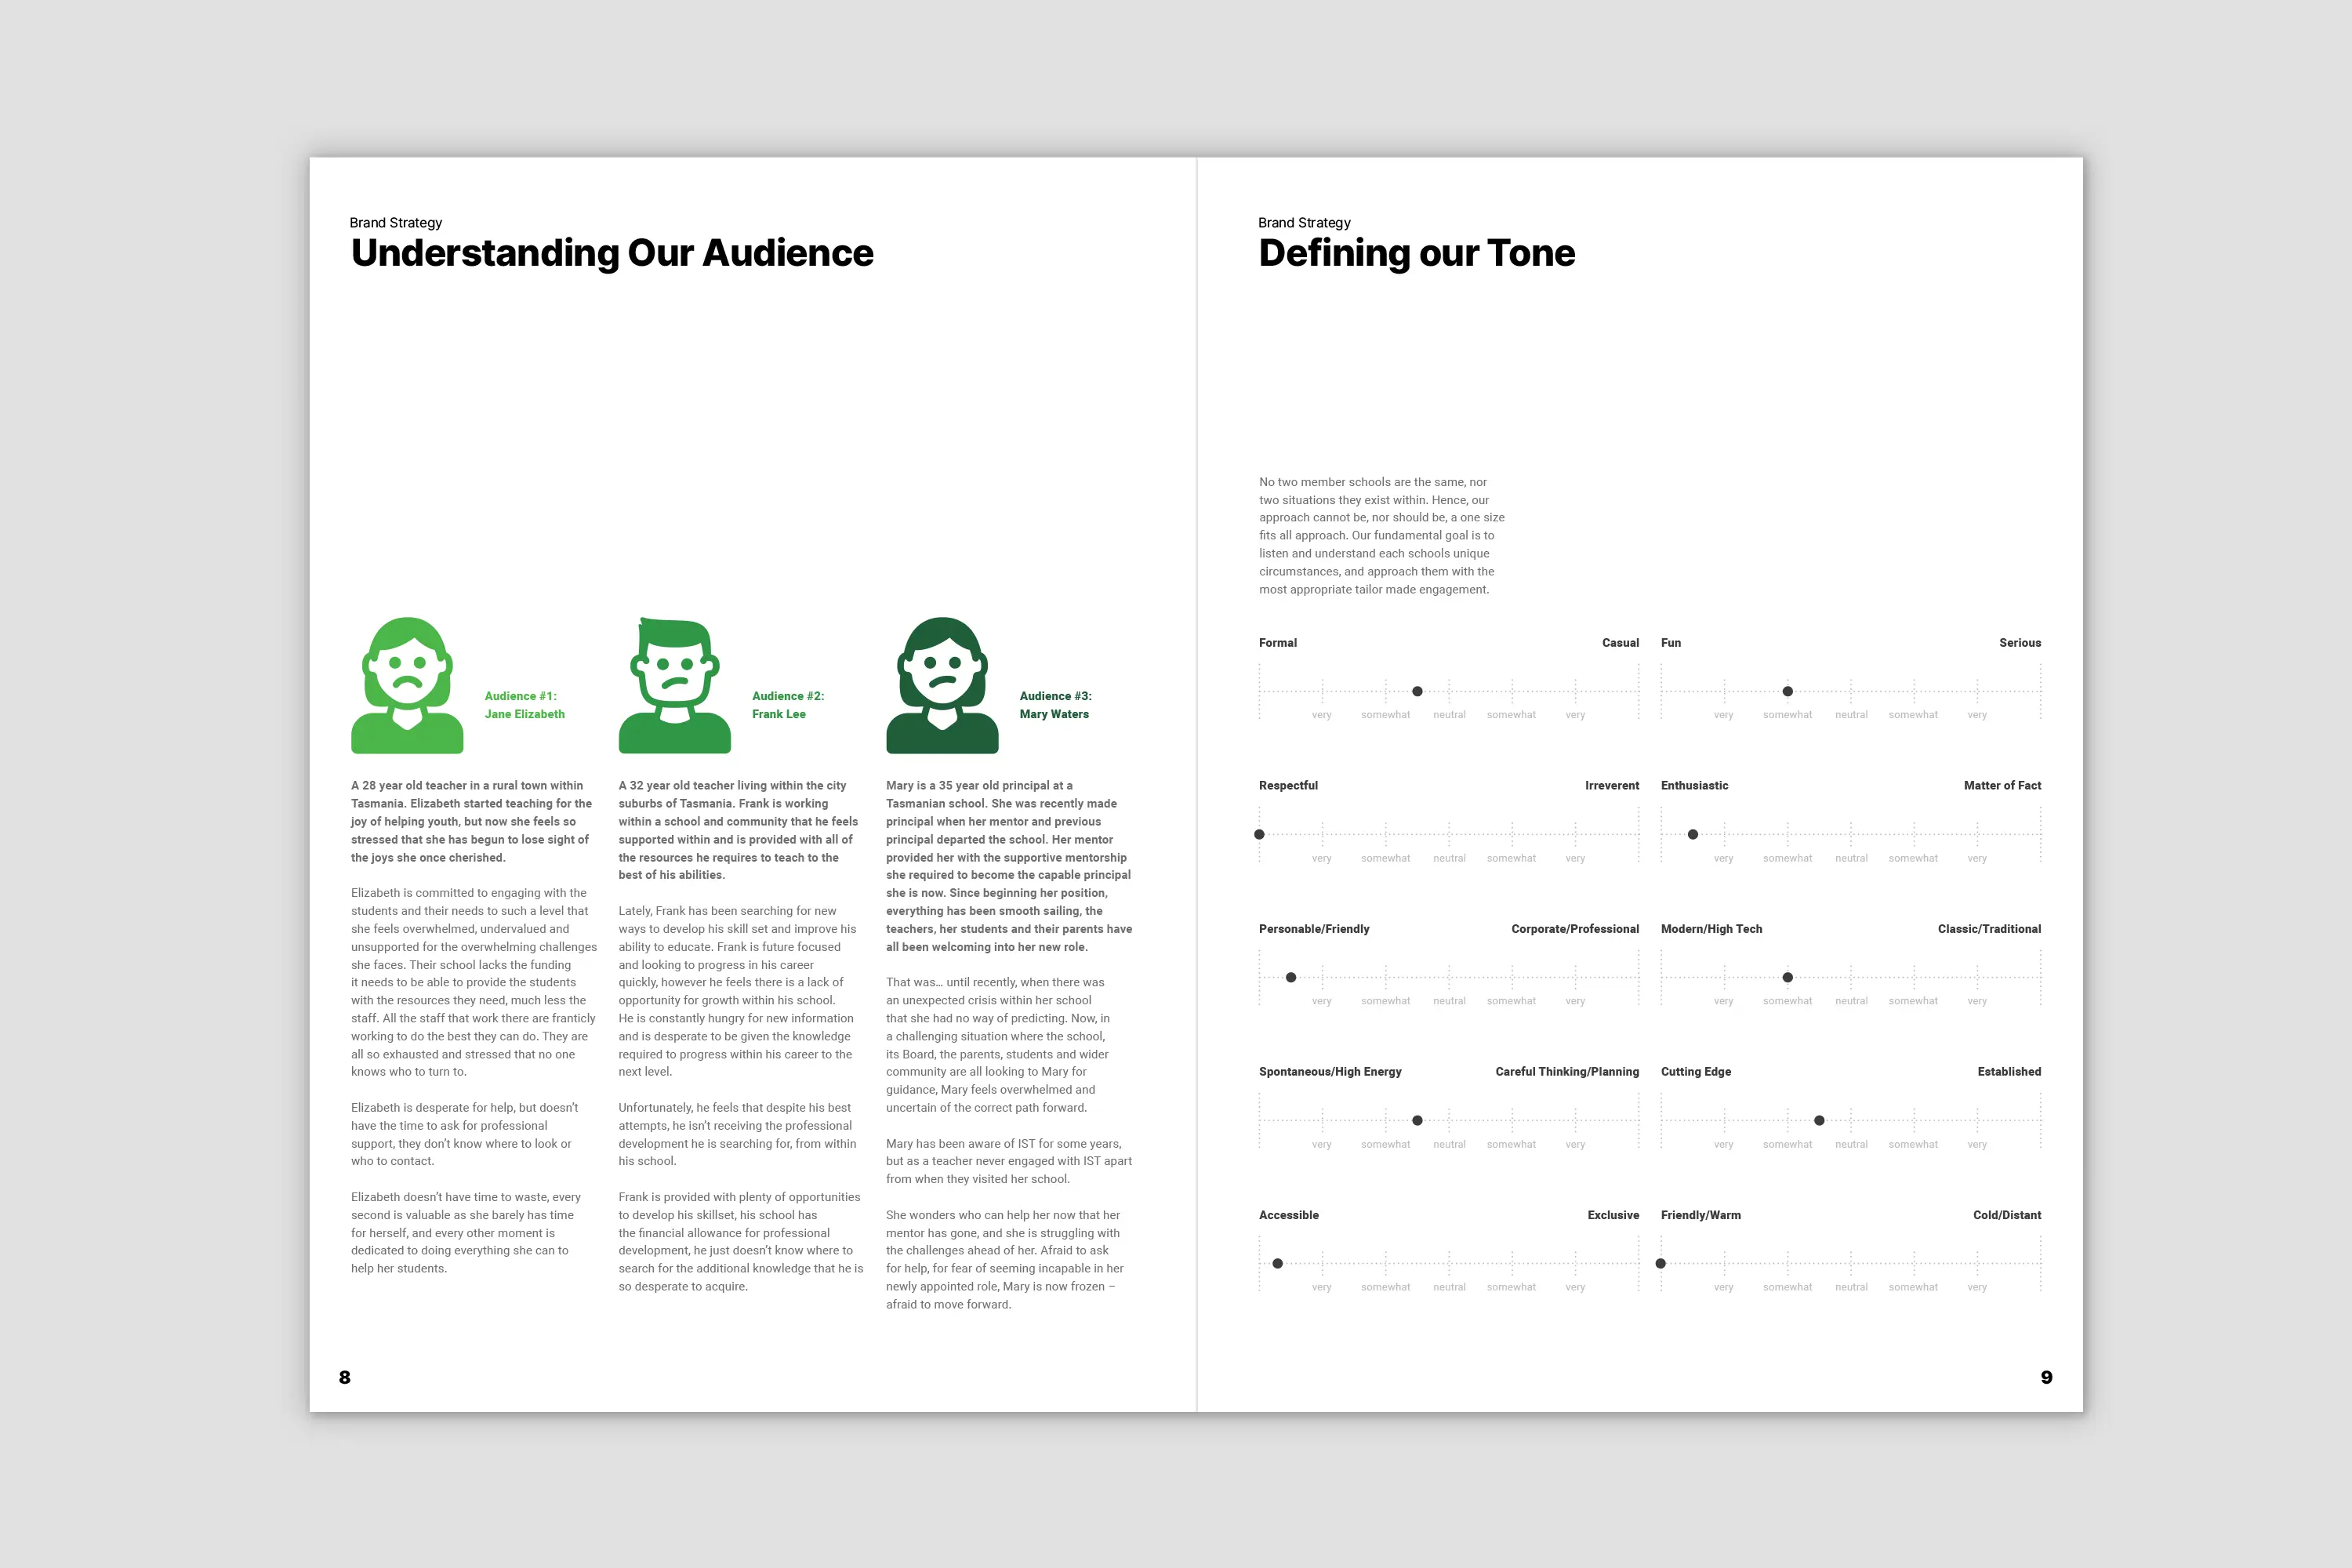 IST brand guidelines spread - audience and messaging spread defining brand personality